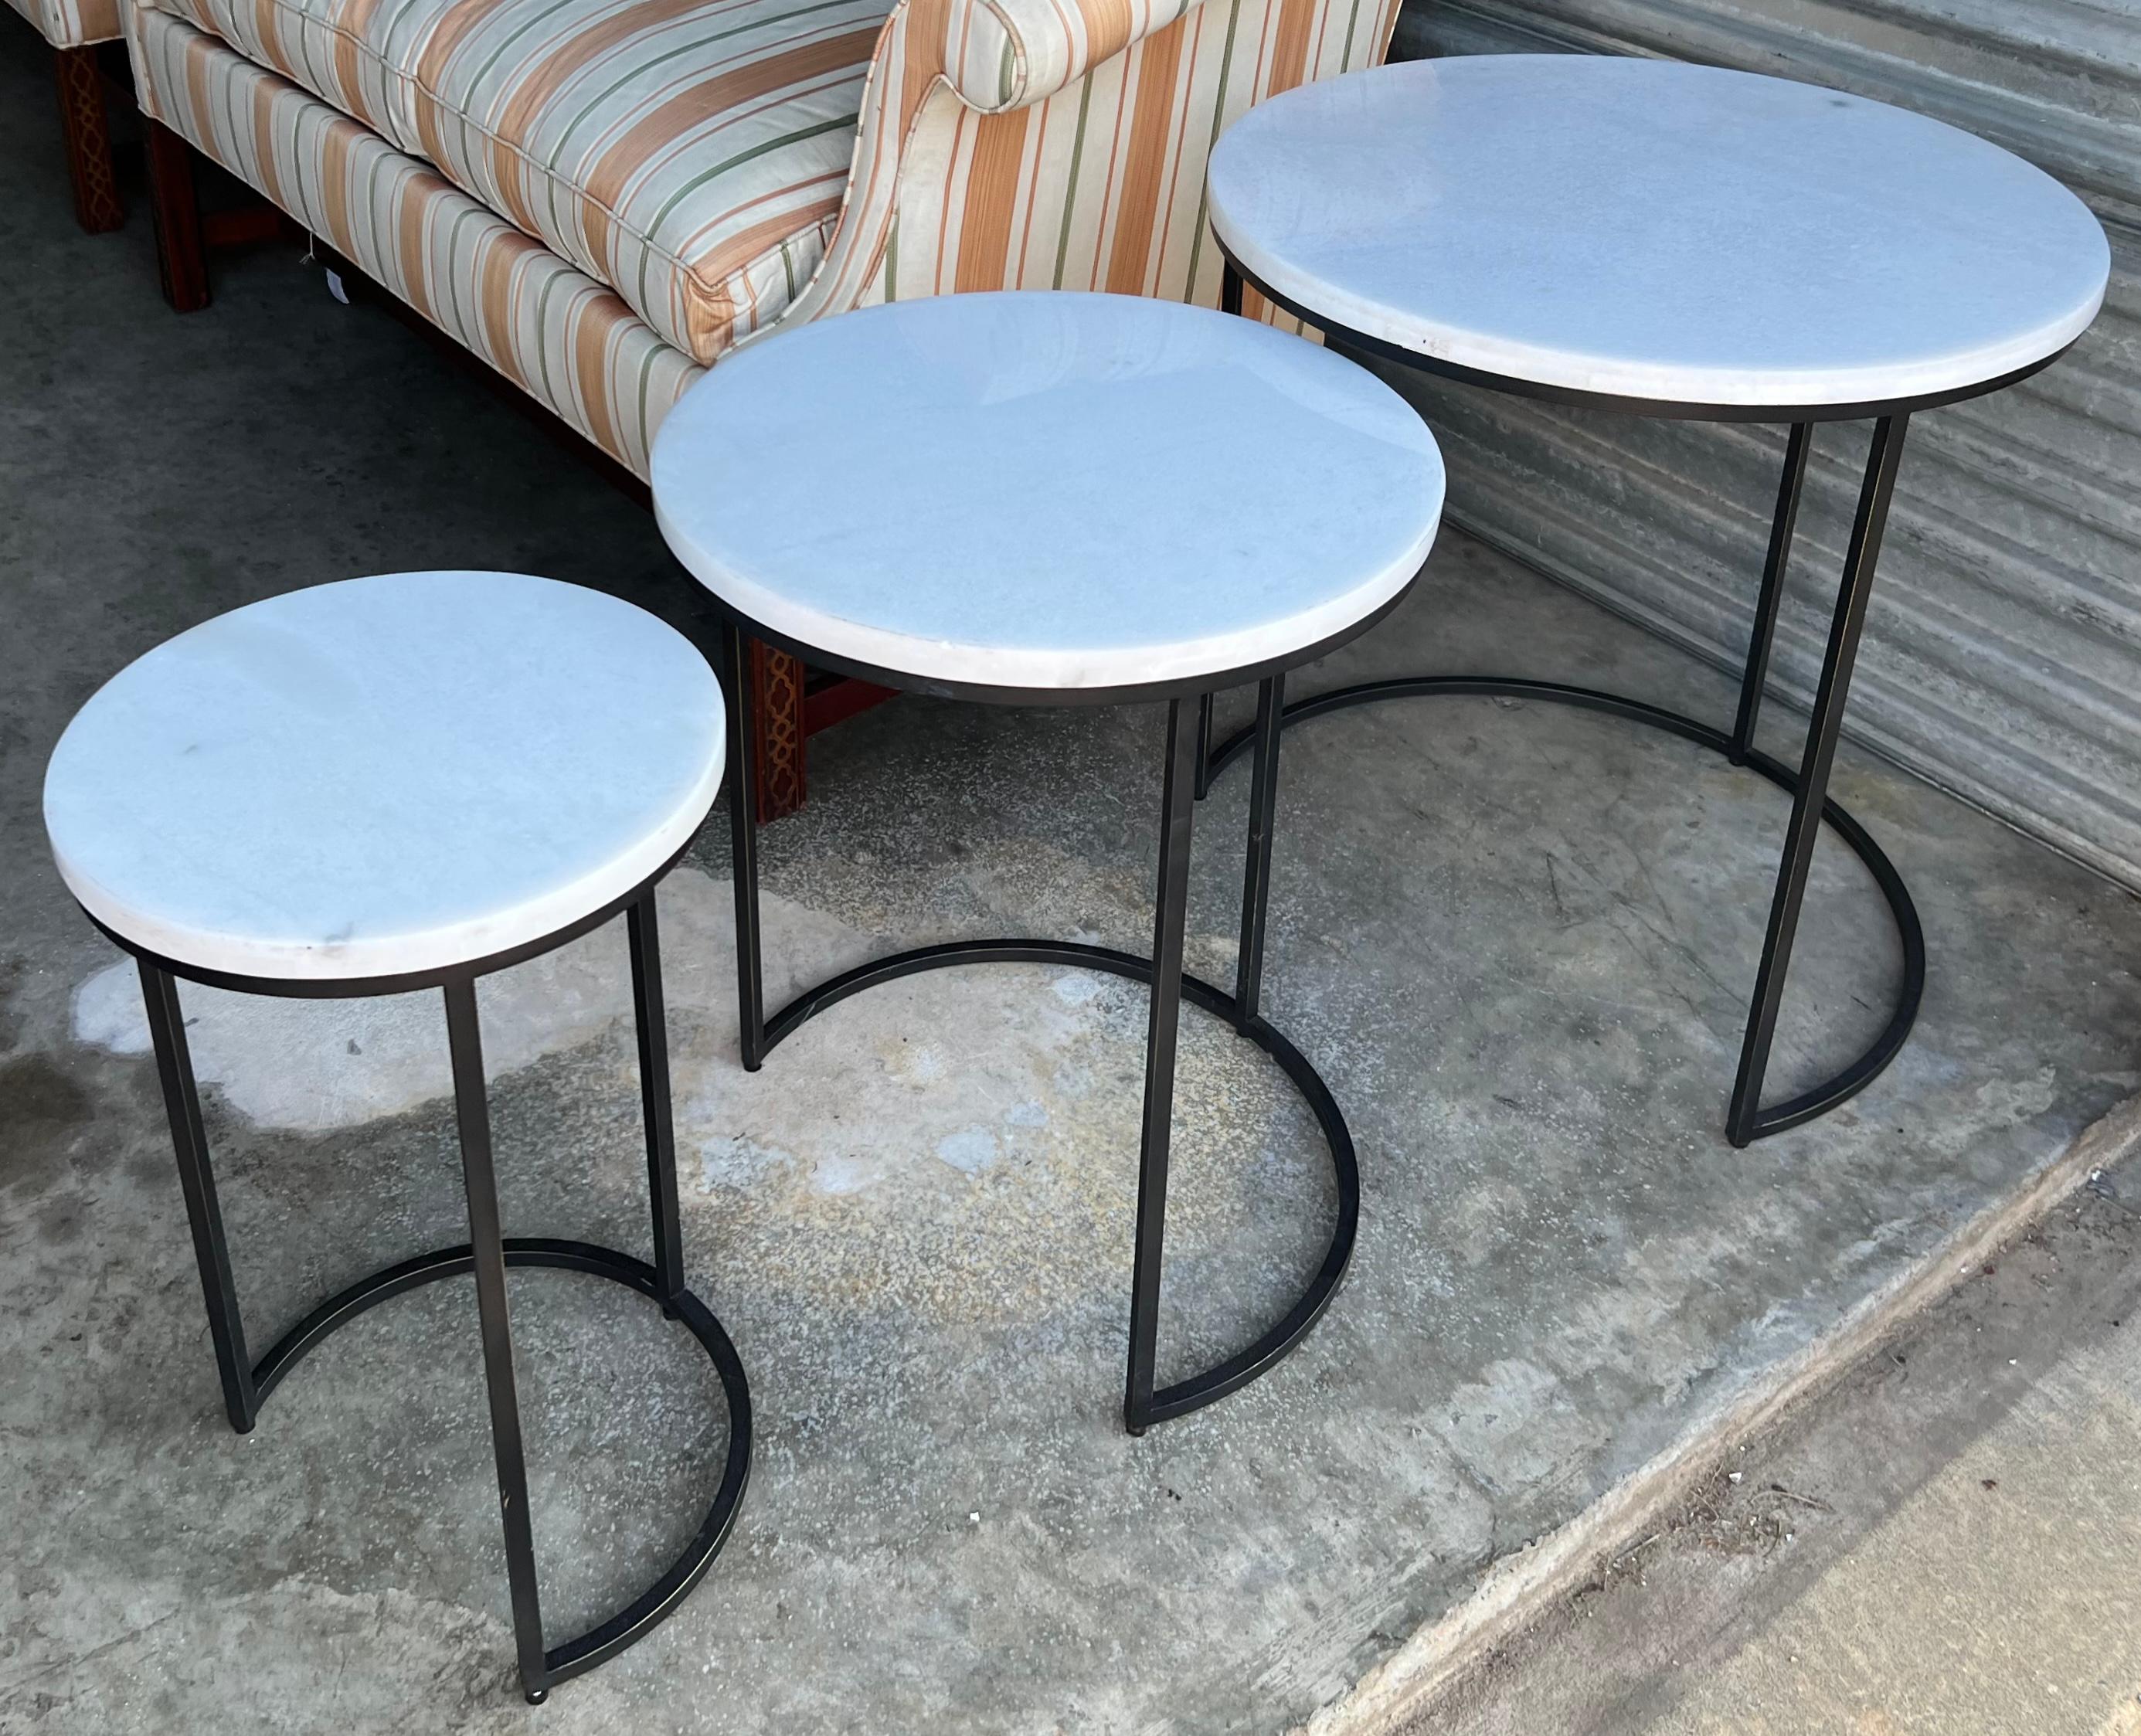 Late 20th-C. Modern Iron & Marble Nesting Tables by Mitchell Gold & Bob William 1